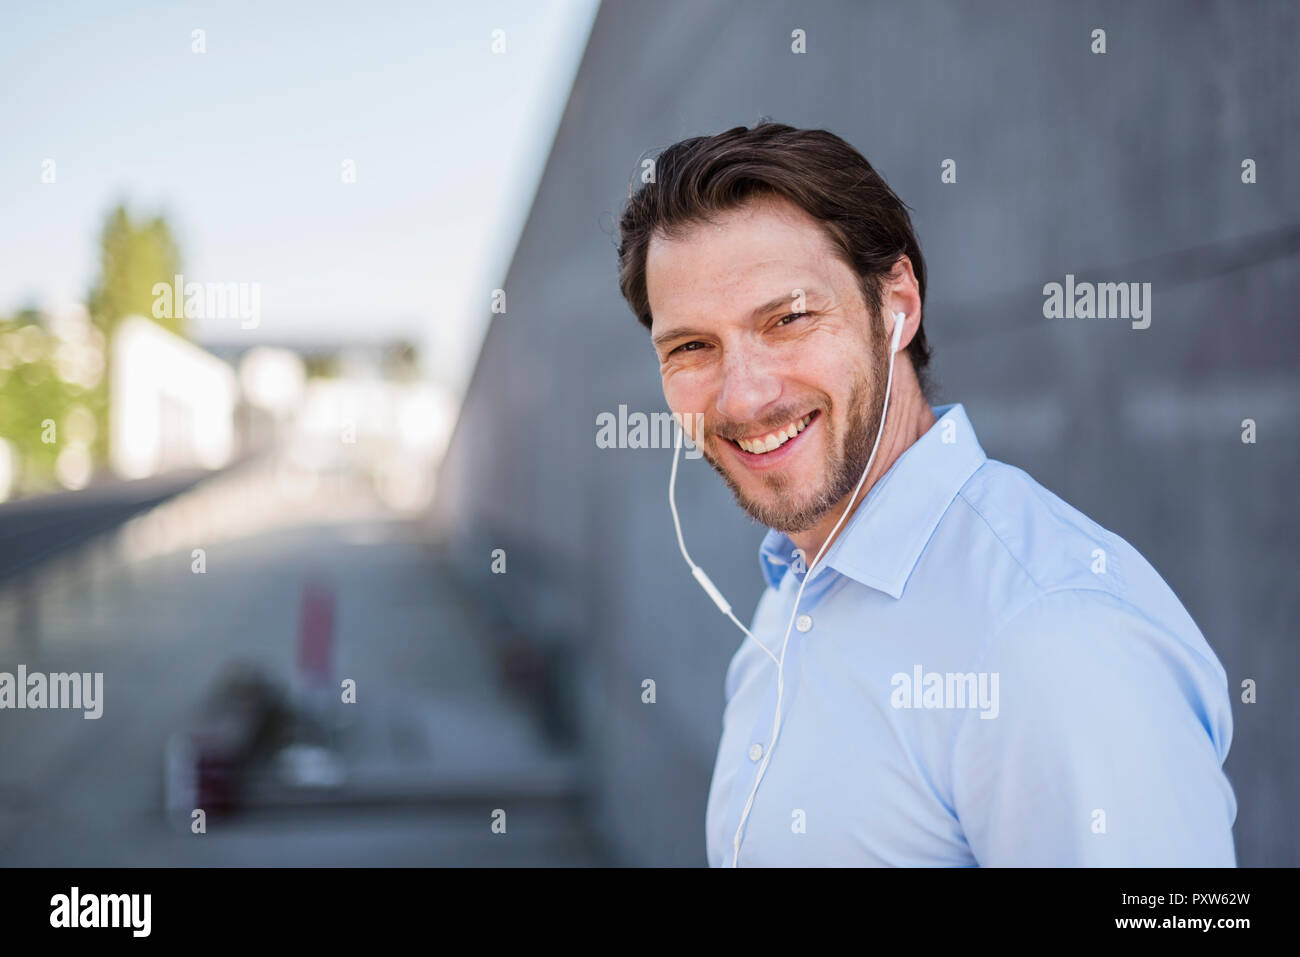 Portrait of smiling businessman wearing earbuds Stock Photo